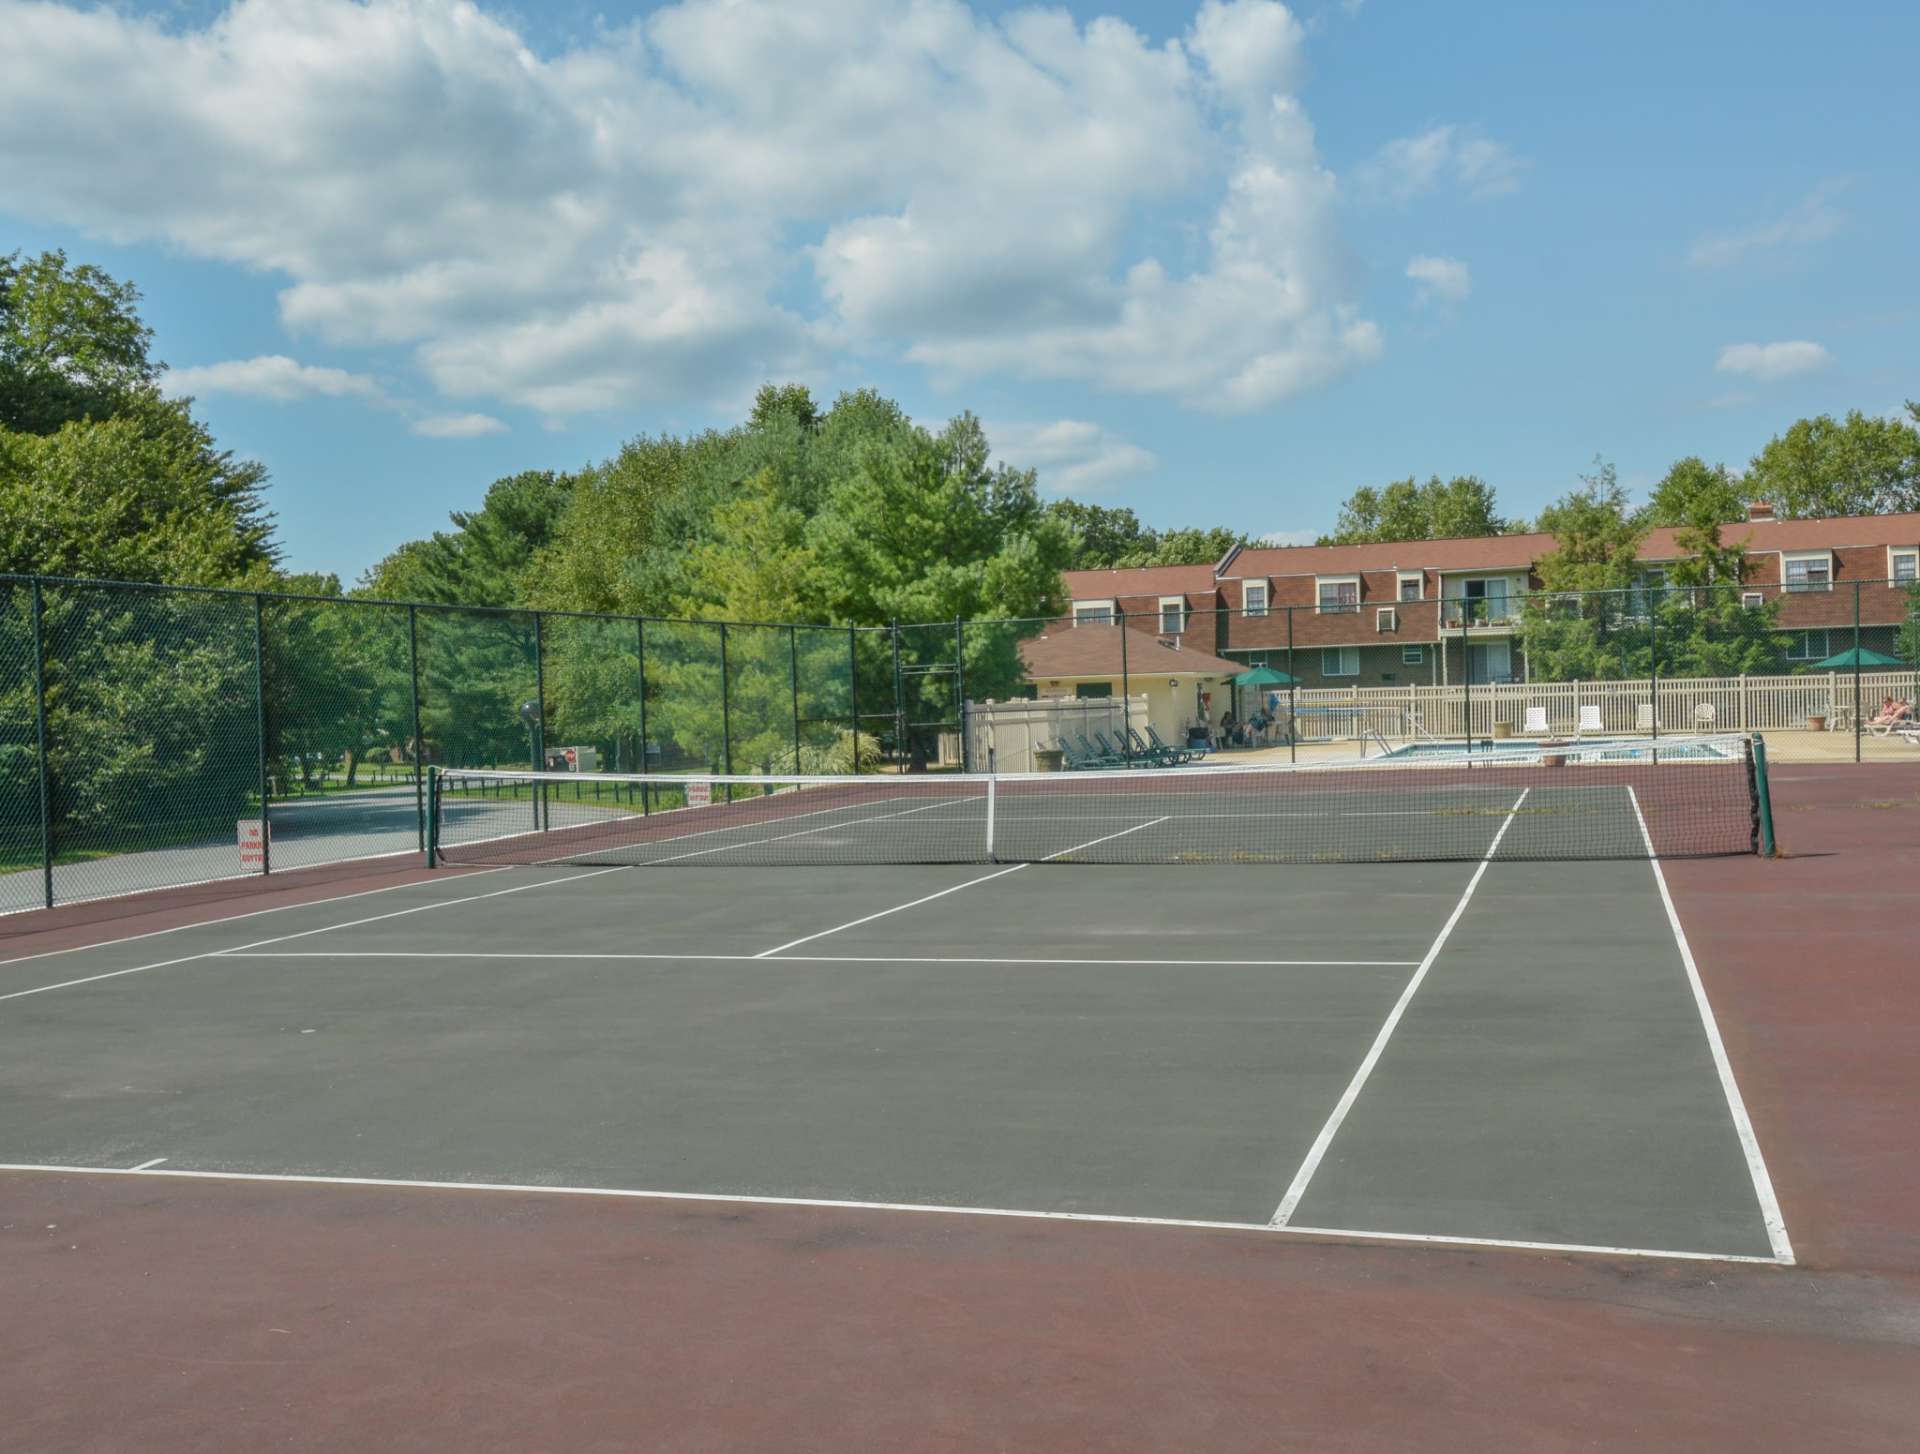 Tennis court area of our community